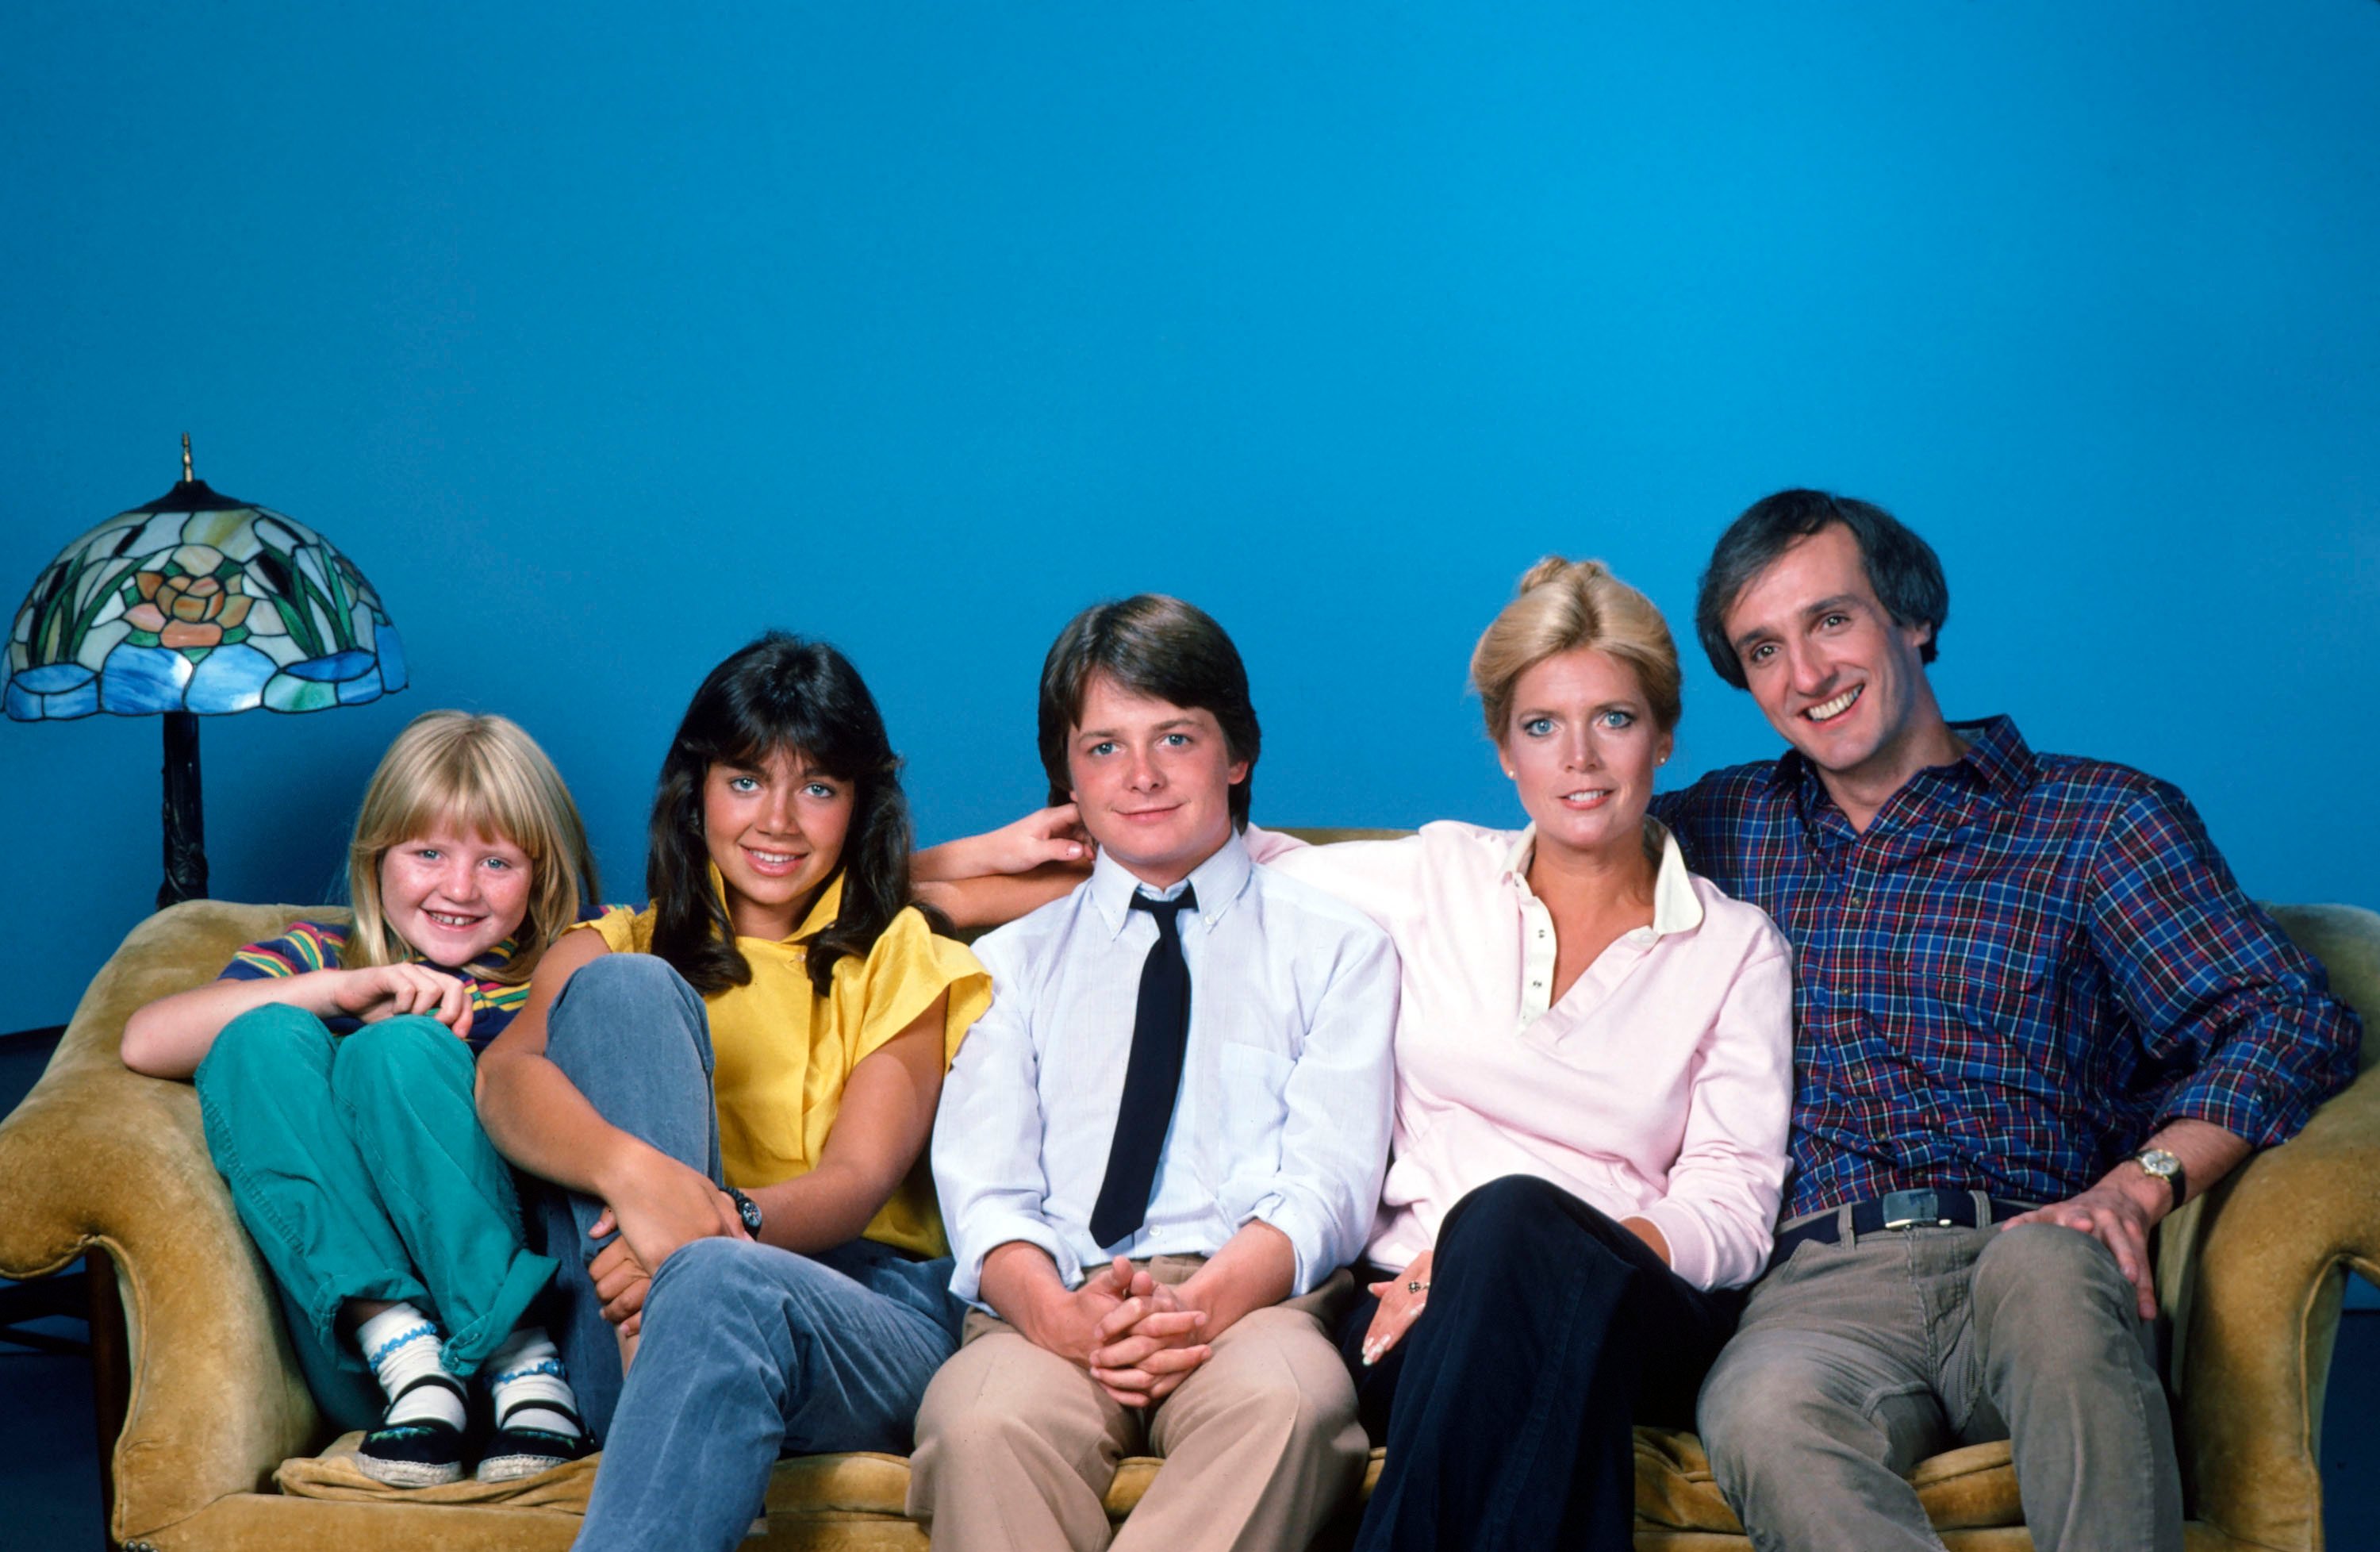 The cast of 'Family Ties' sits together on a couch in 1982: (L to R): Tina Yothers as Jennifer Keaton, Justine Bateman as Mallory Keaton, Michael J. Fox as Alex P. Keaton, Meredith Baxter as Elyse Keaton, and Michael Gross as Steven Keaton 